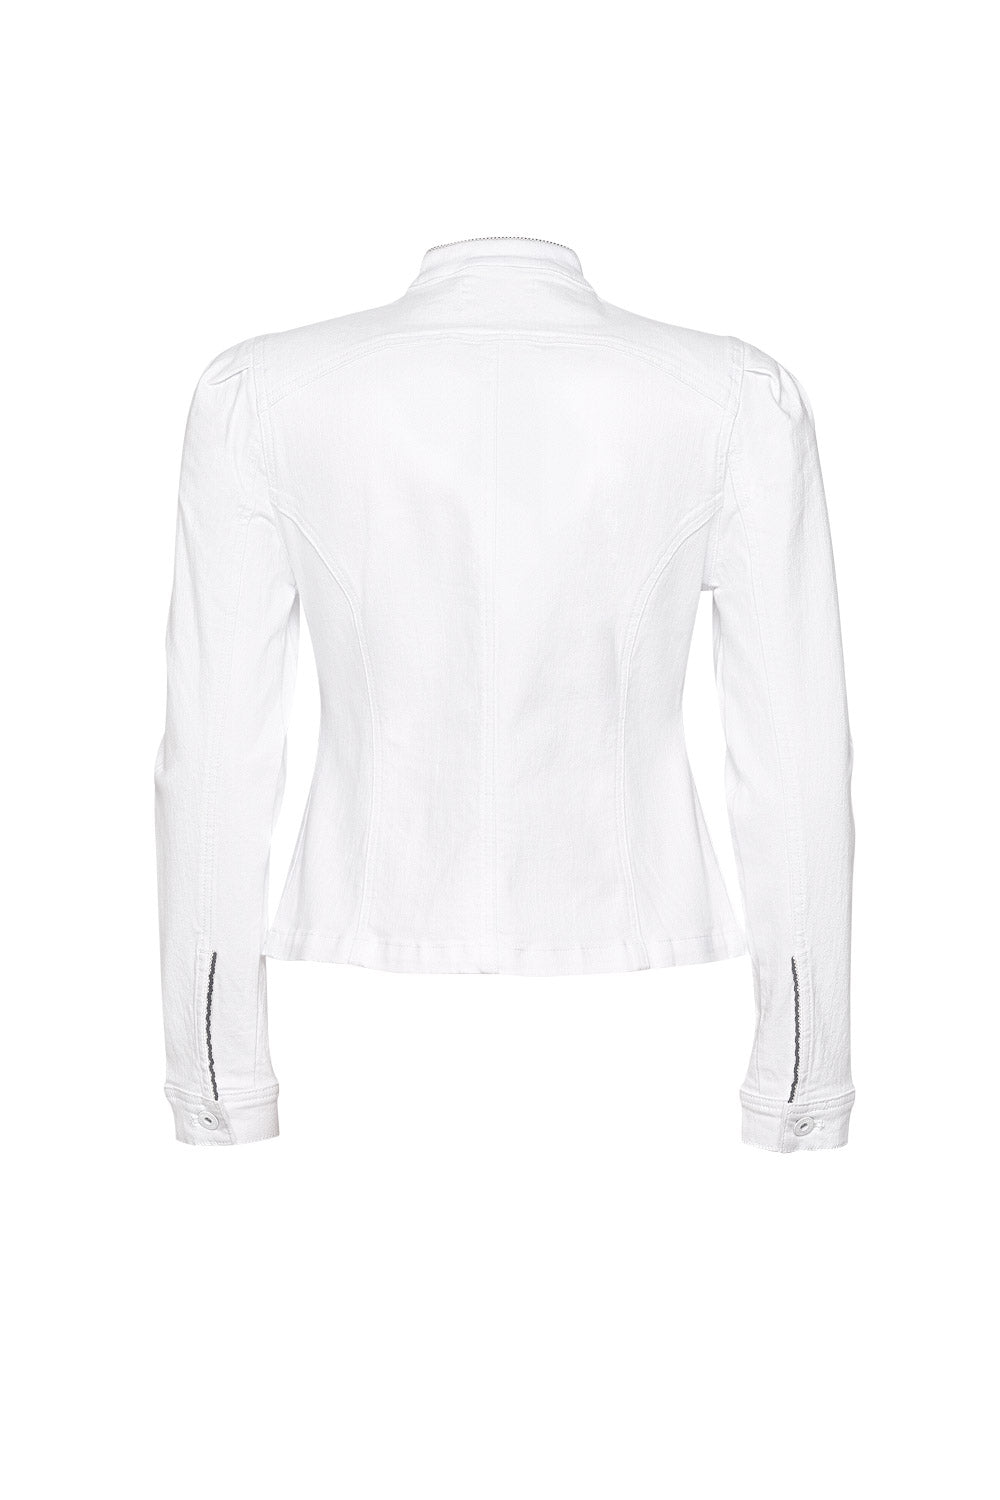 LOOBIES STORY FINESSE JACKET - WHITE